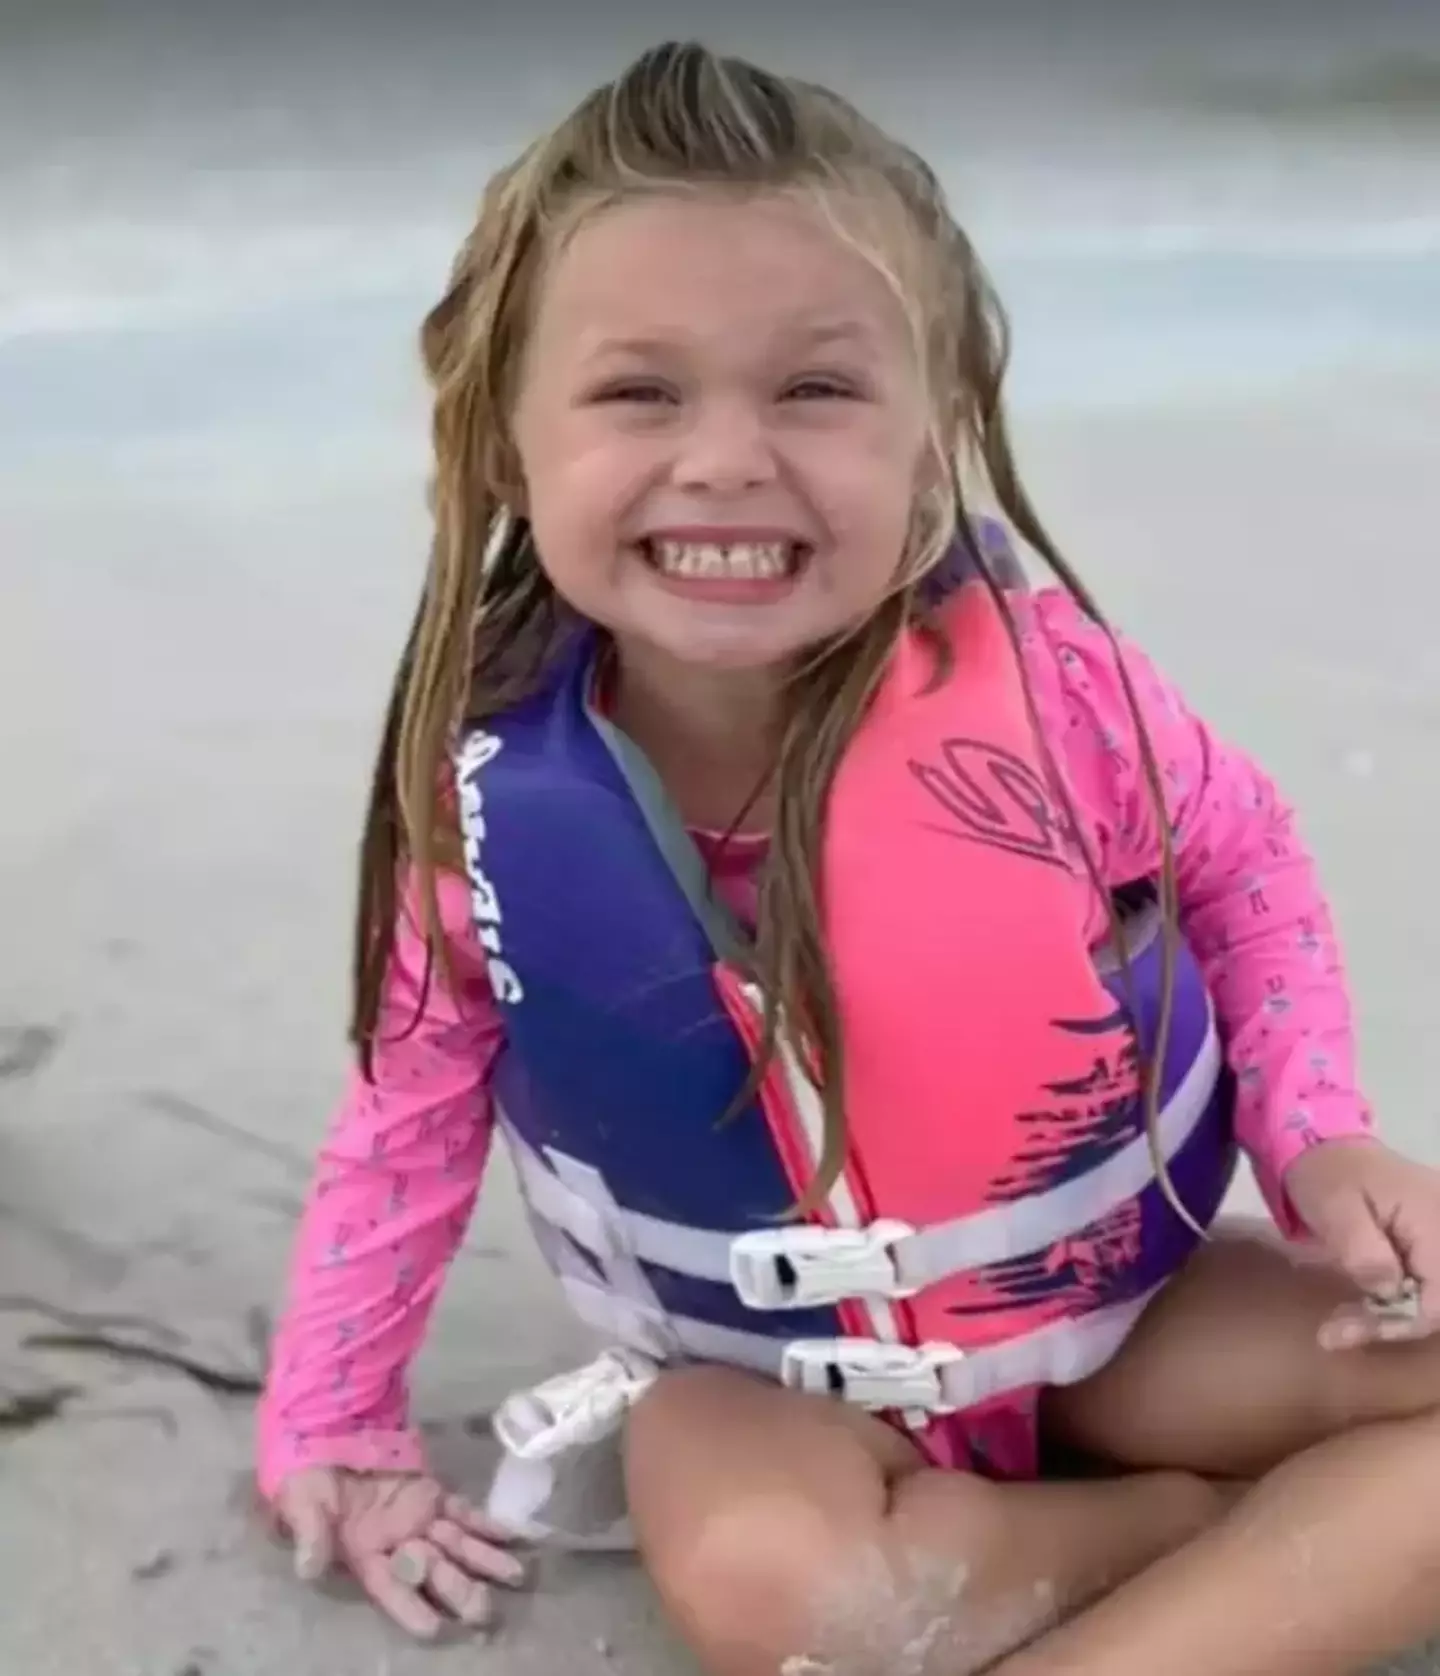 The seven-year-old died after a sand hole she and her brother were digging collapsed on them.